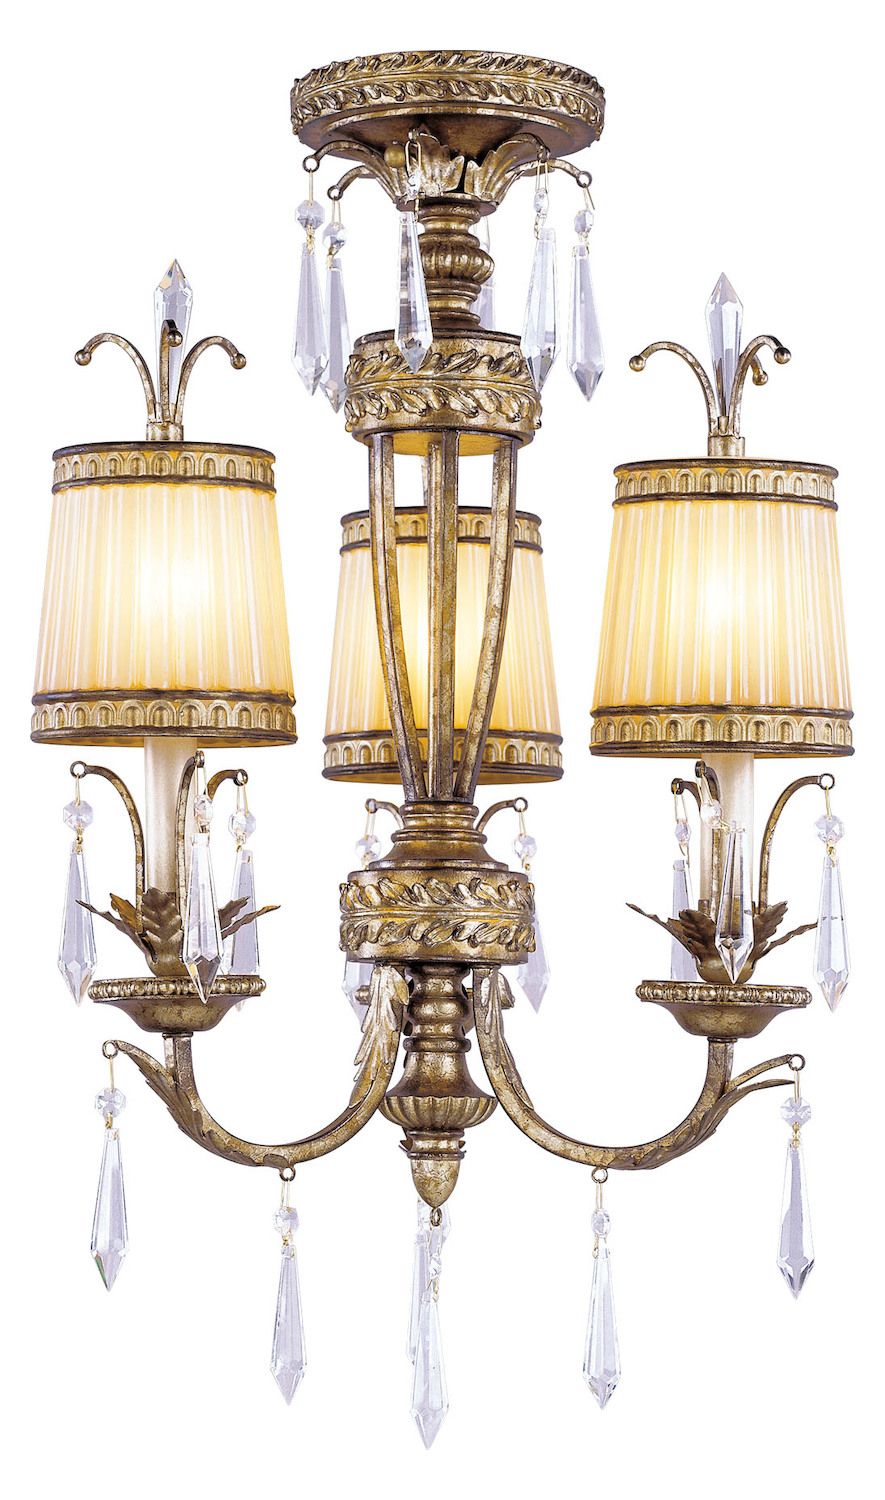 Livex Lighting Vintage Gold Leaf Up Chandelier Vintage With Regard To Antique Gold Three Light Chandeliers (View 13 of 15)